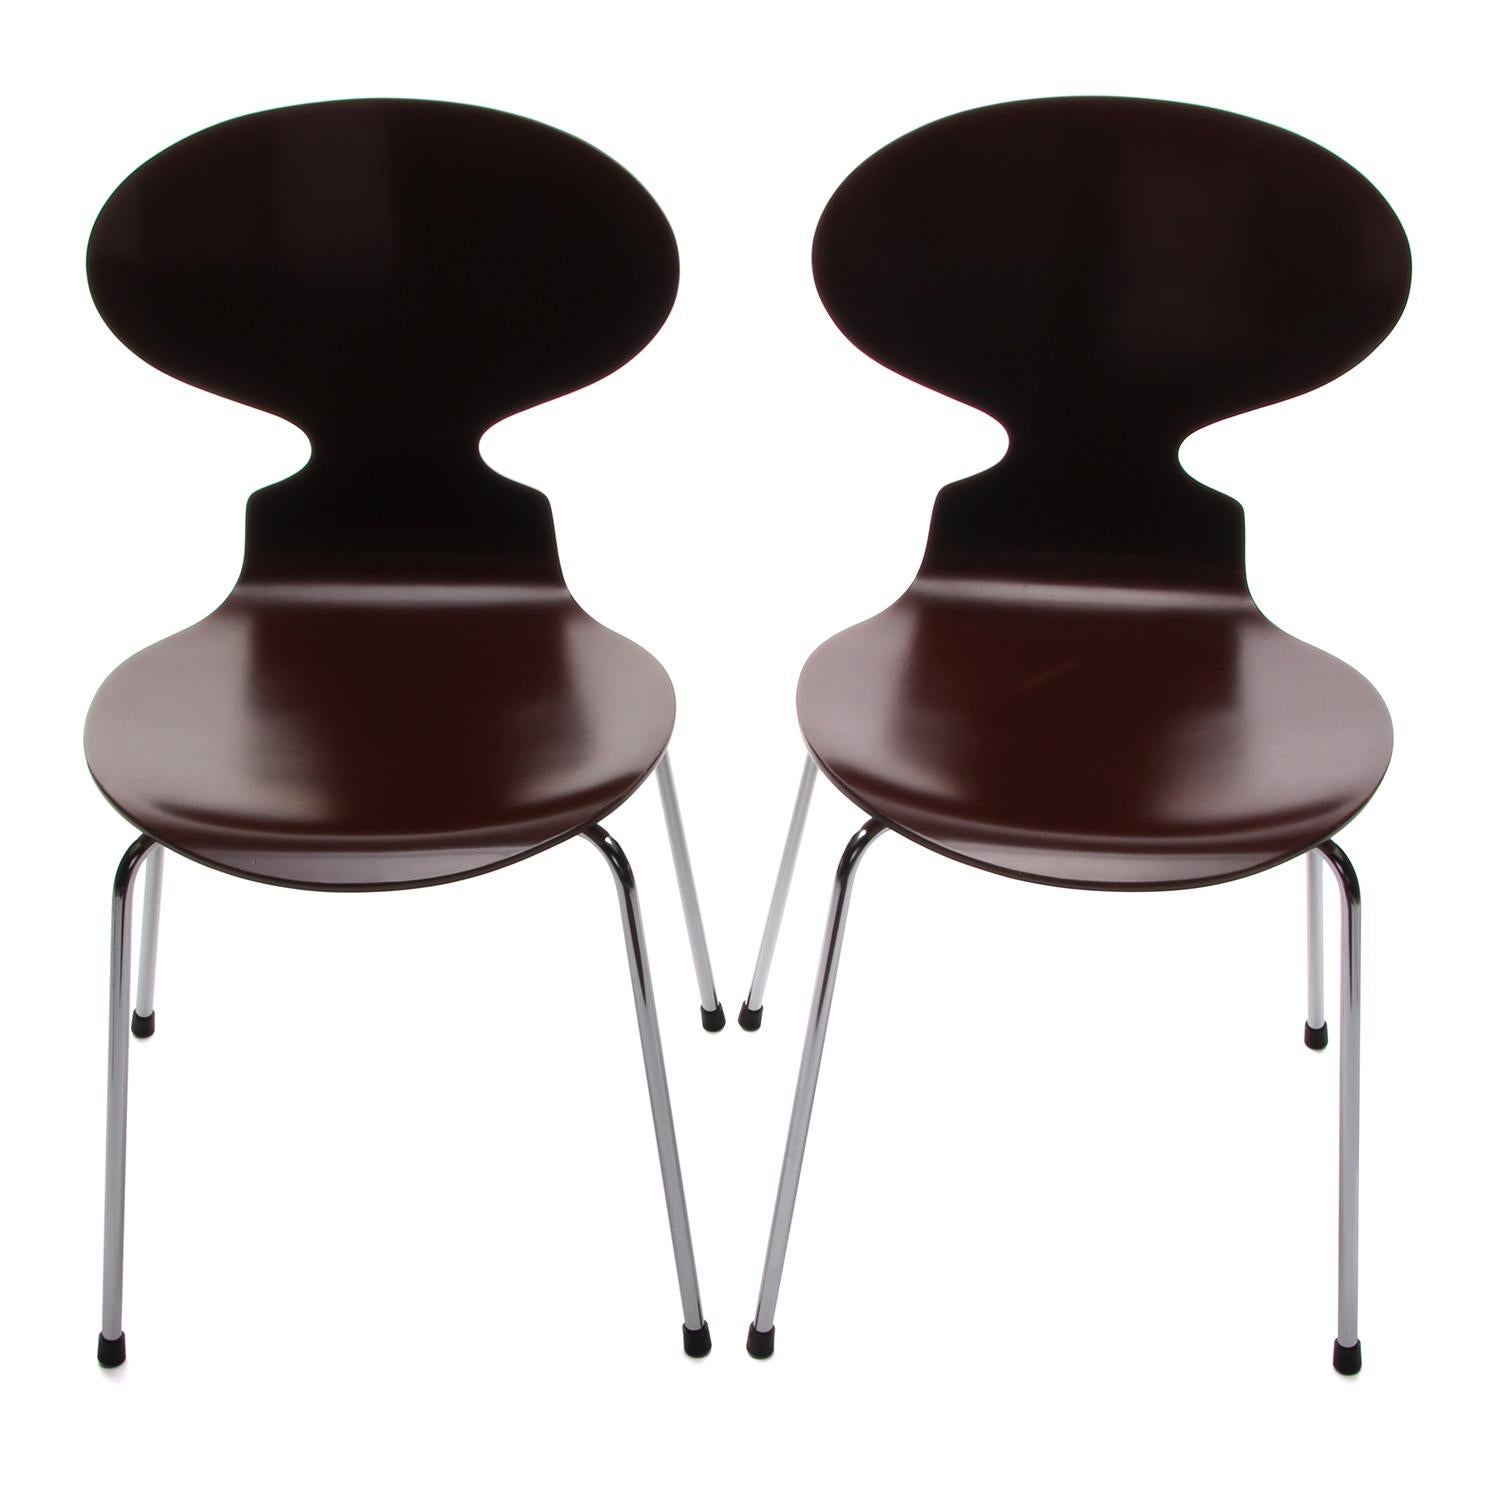 The ANT Chair - Model 3100, designed by Arne Jacobsen in 1952 and produced by Fritz Hansen - a pair of iconic midcentury design pieces - original vintage four-legged ANT chairs, in good vintage condition!

The 3100 or ANT chair is one of the most